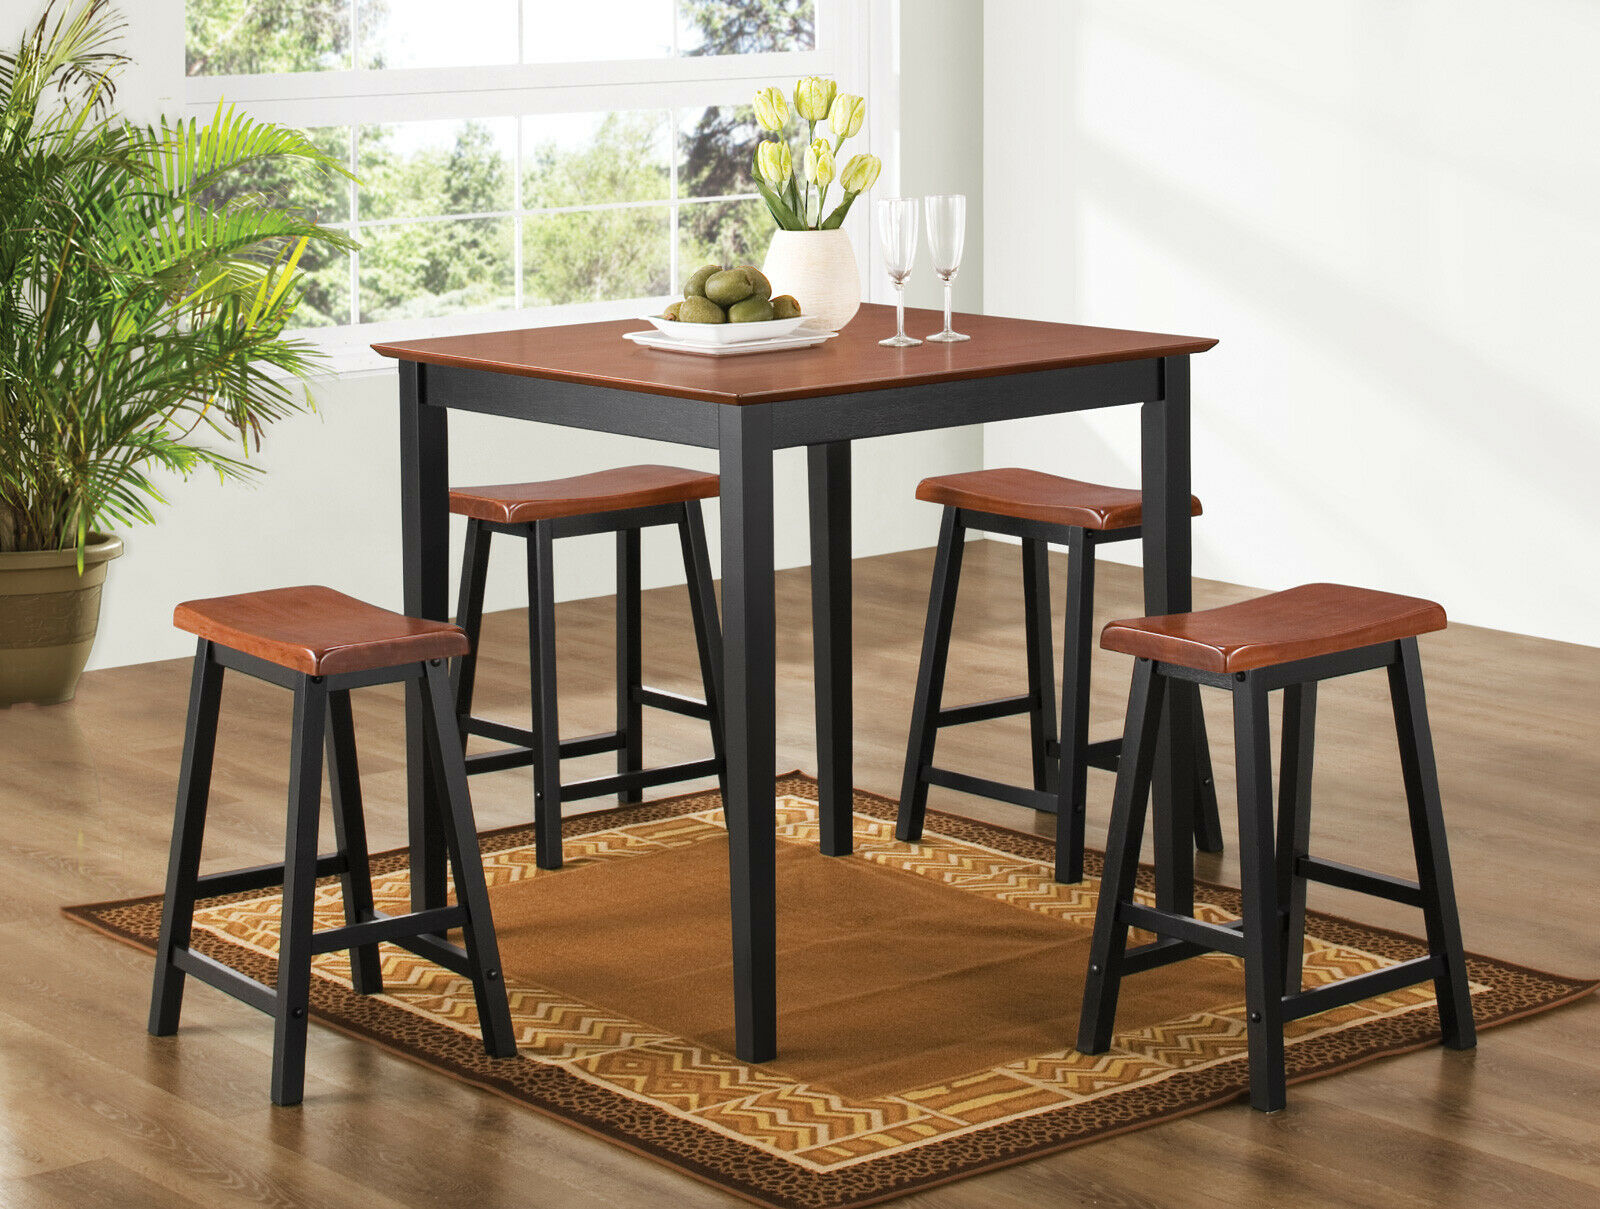 5 Piece Counter Height Dining Table And Stool Set in Oak and Black